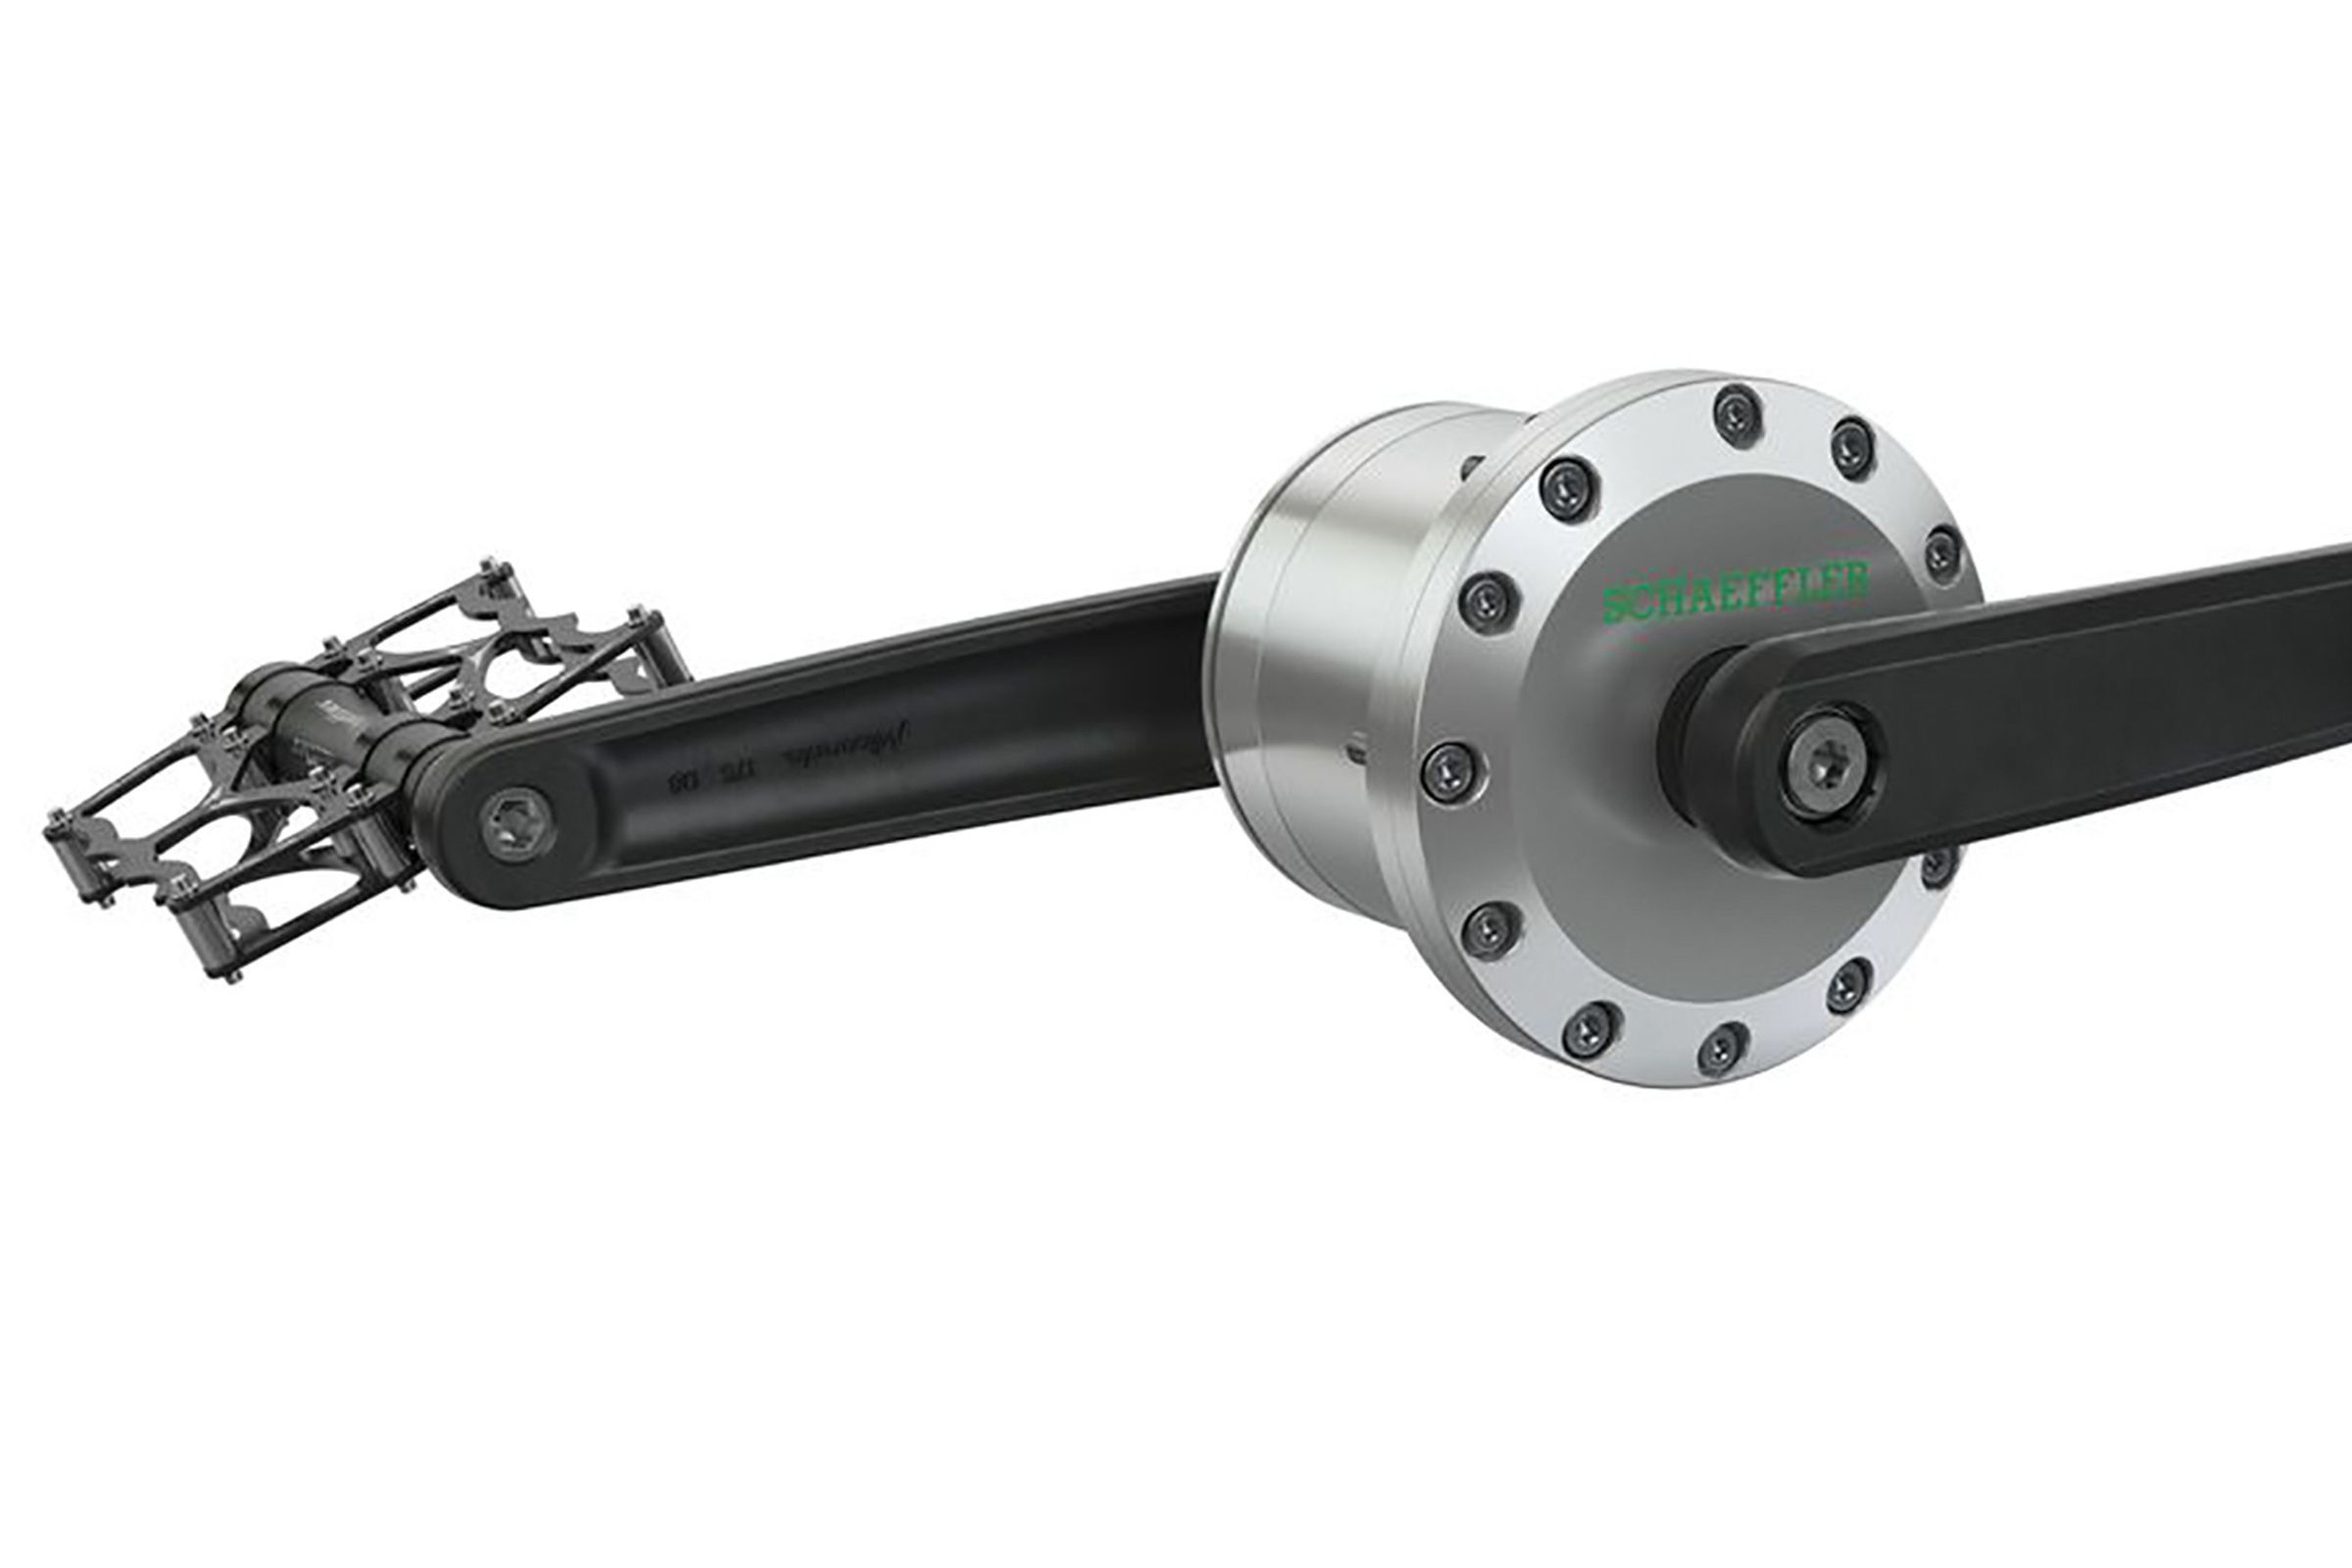 Schaeffler’s Free Drive system converts pedal power into electrical power.